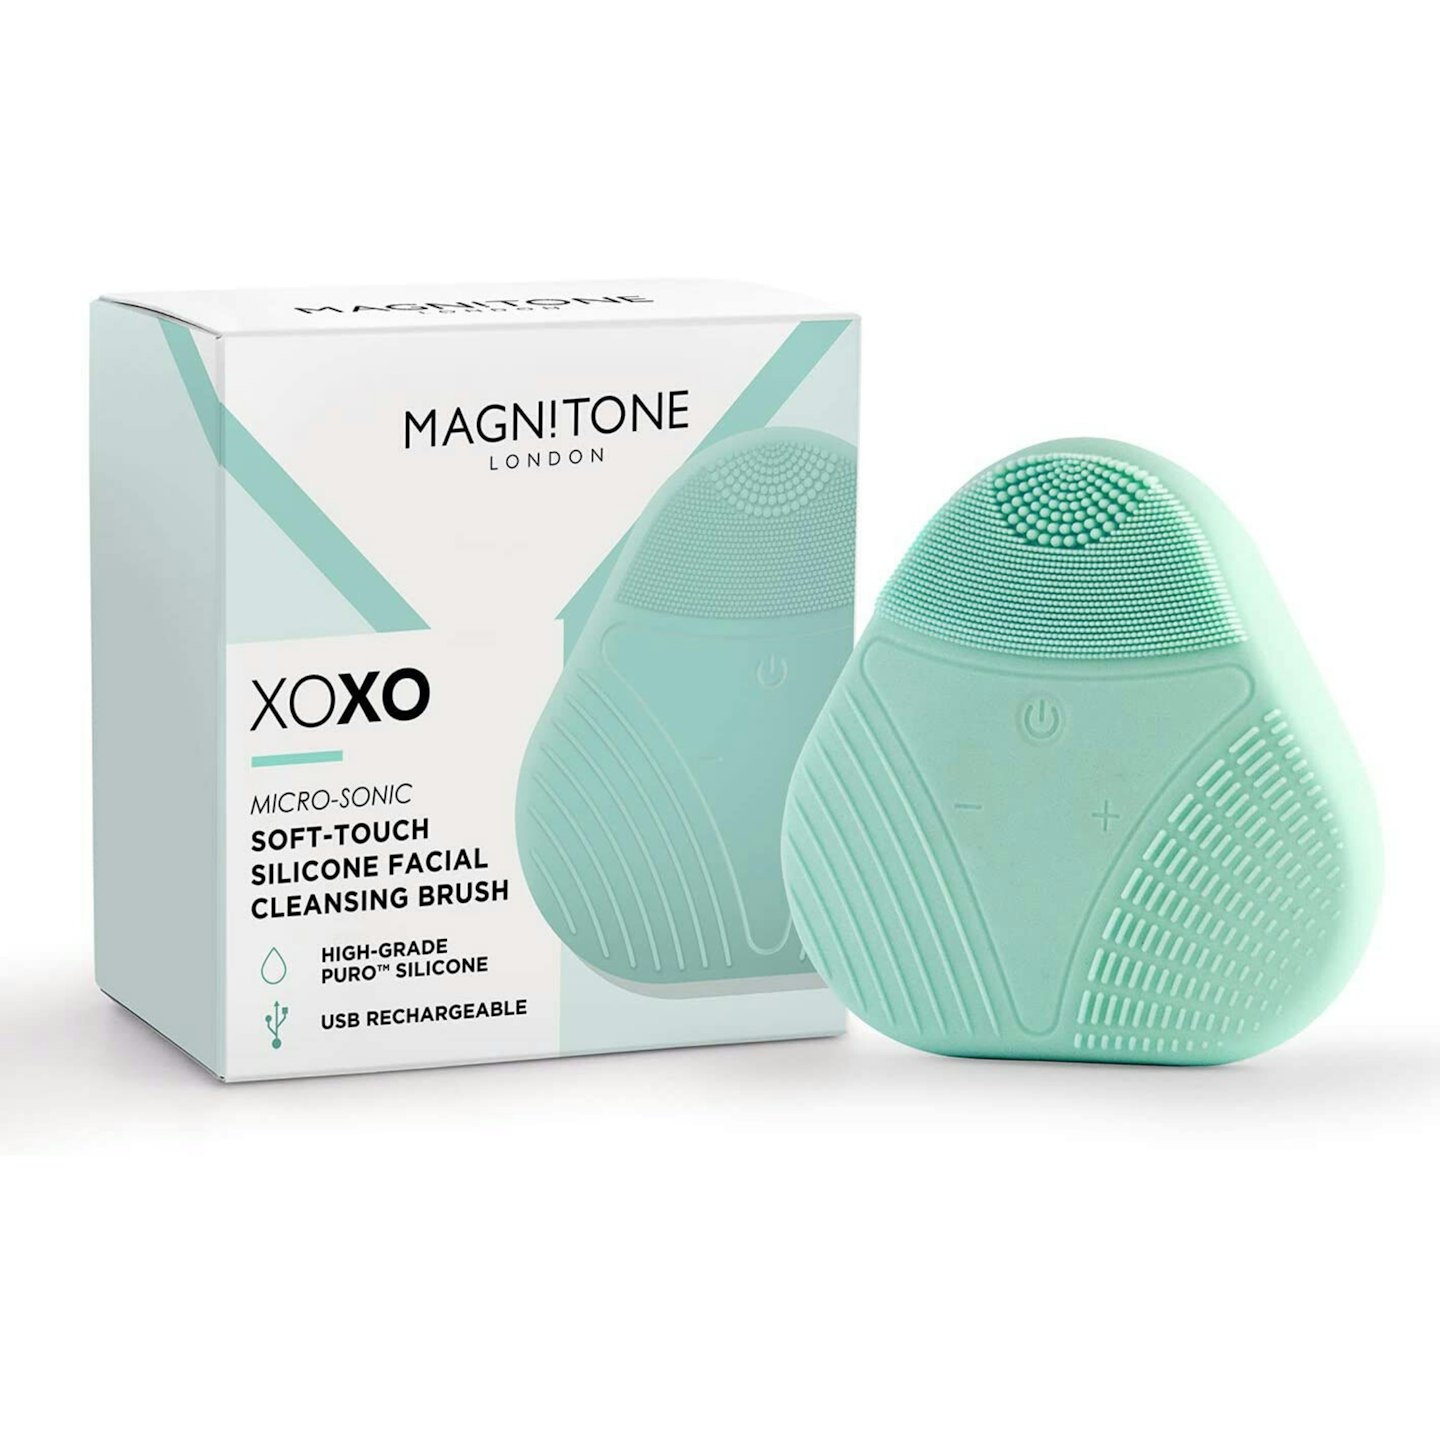 Magnitone Xoxo Micro-Sonic Softtouch Silicone Facial Cleansing Brush